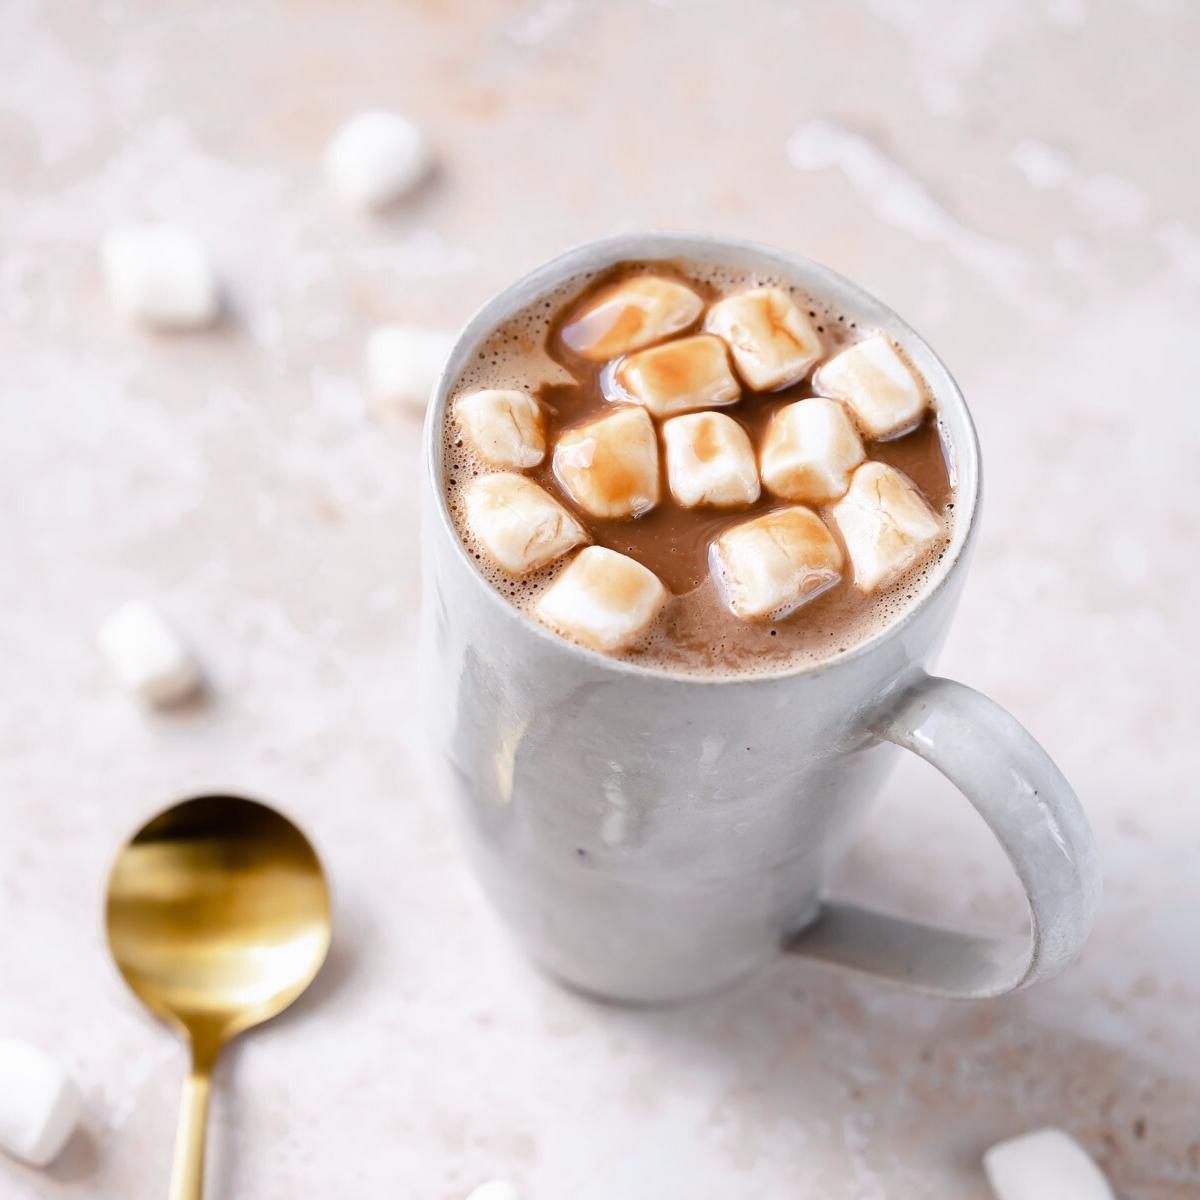 A white ceramic mug filled with brown hot chocolate and mini marshmallows resting on a tan table next to a gold spoon.